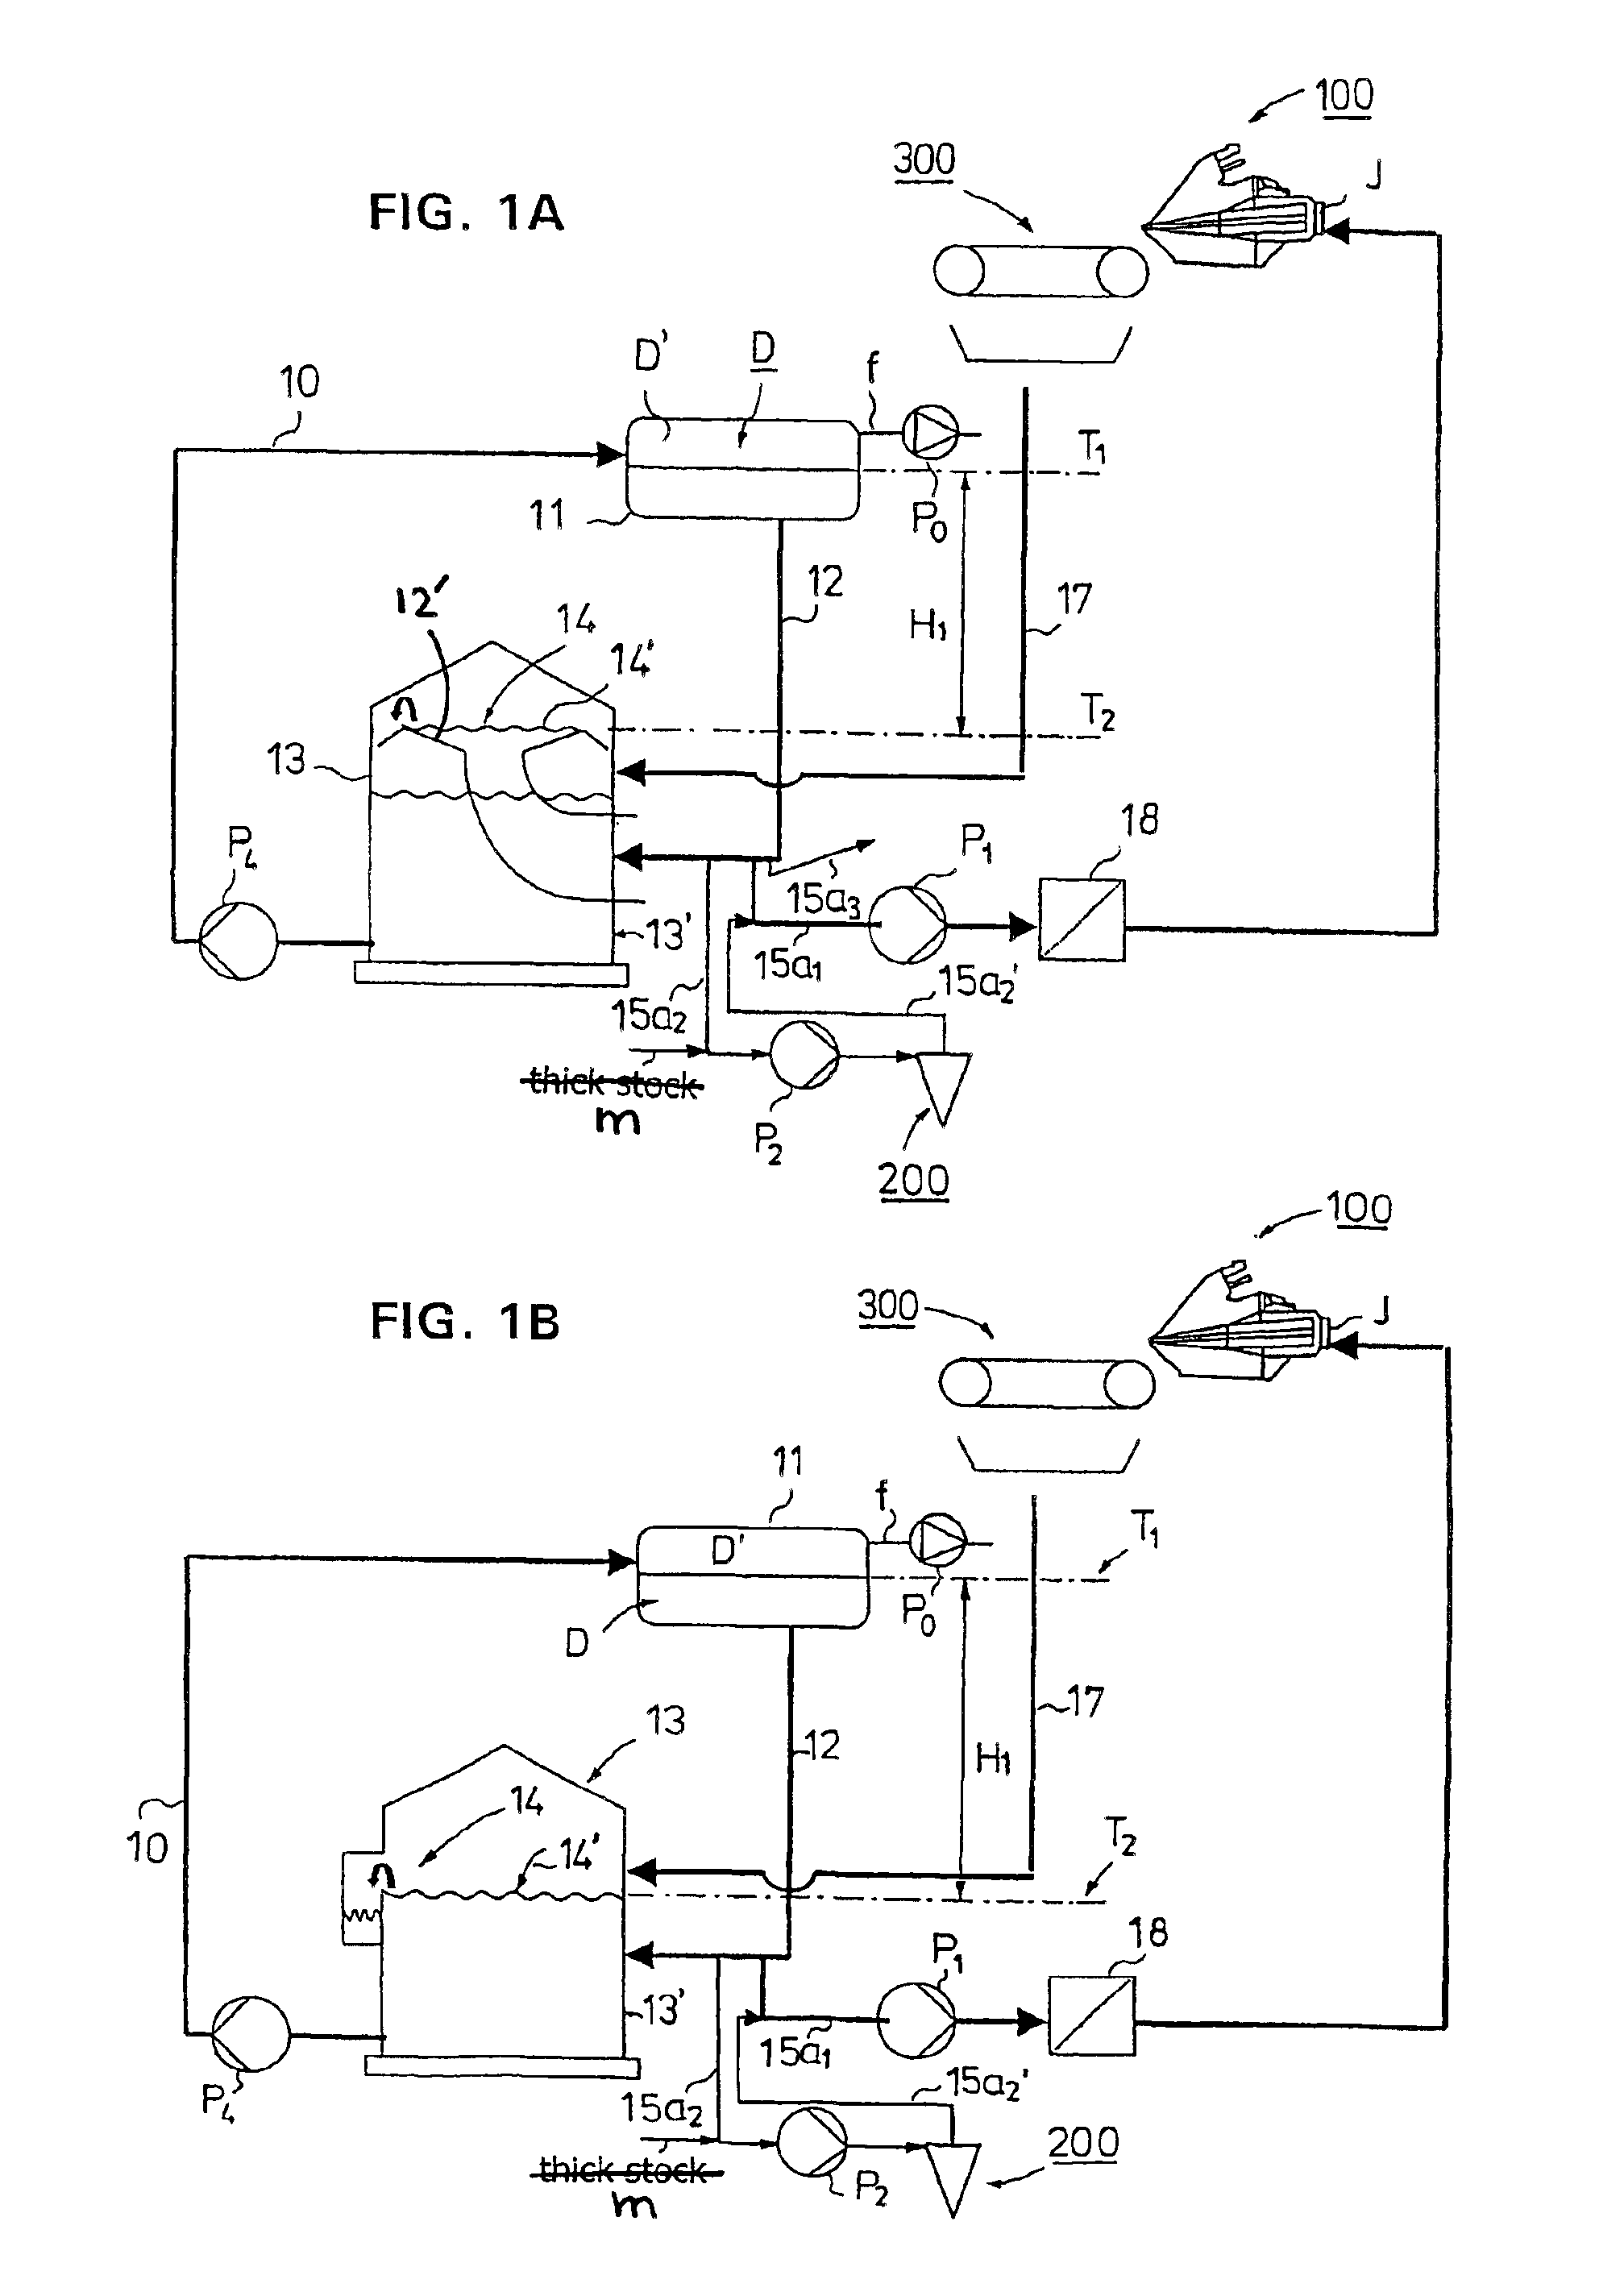 Apparatus for passing stock into a headbox of a paper machine or equivalent